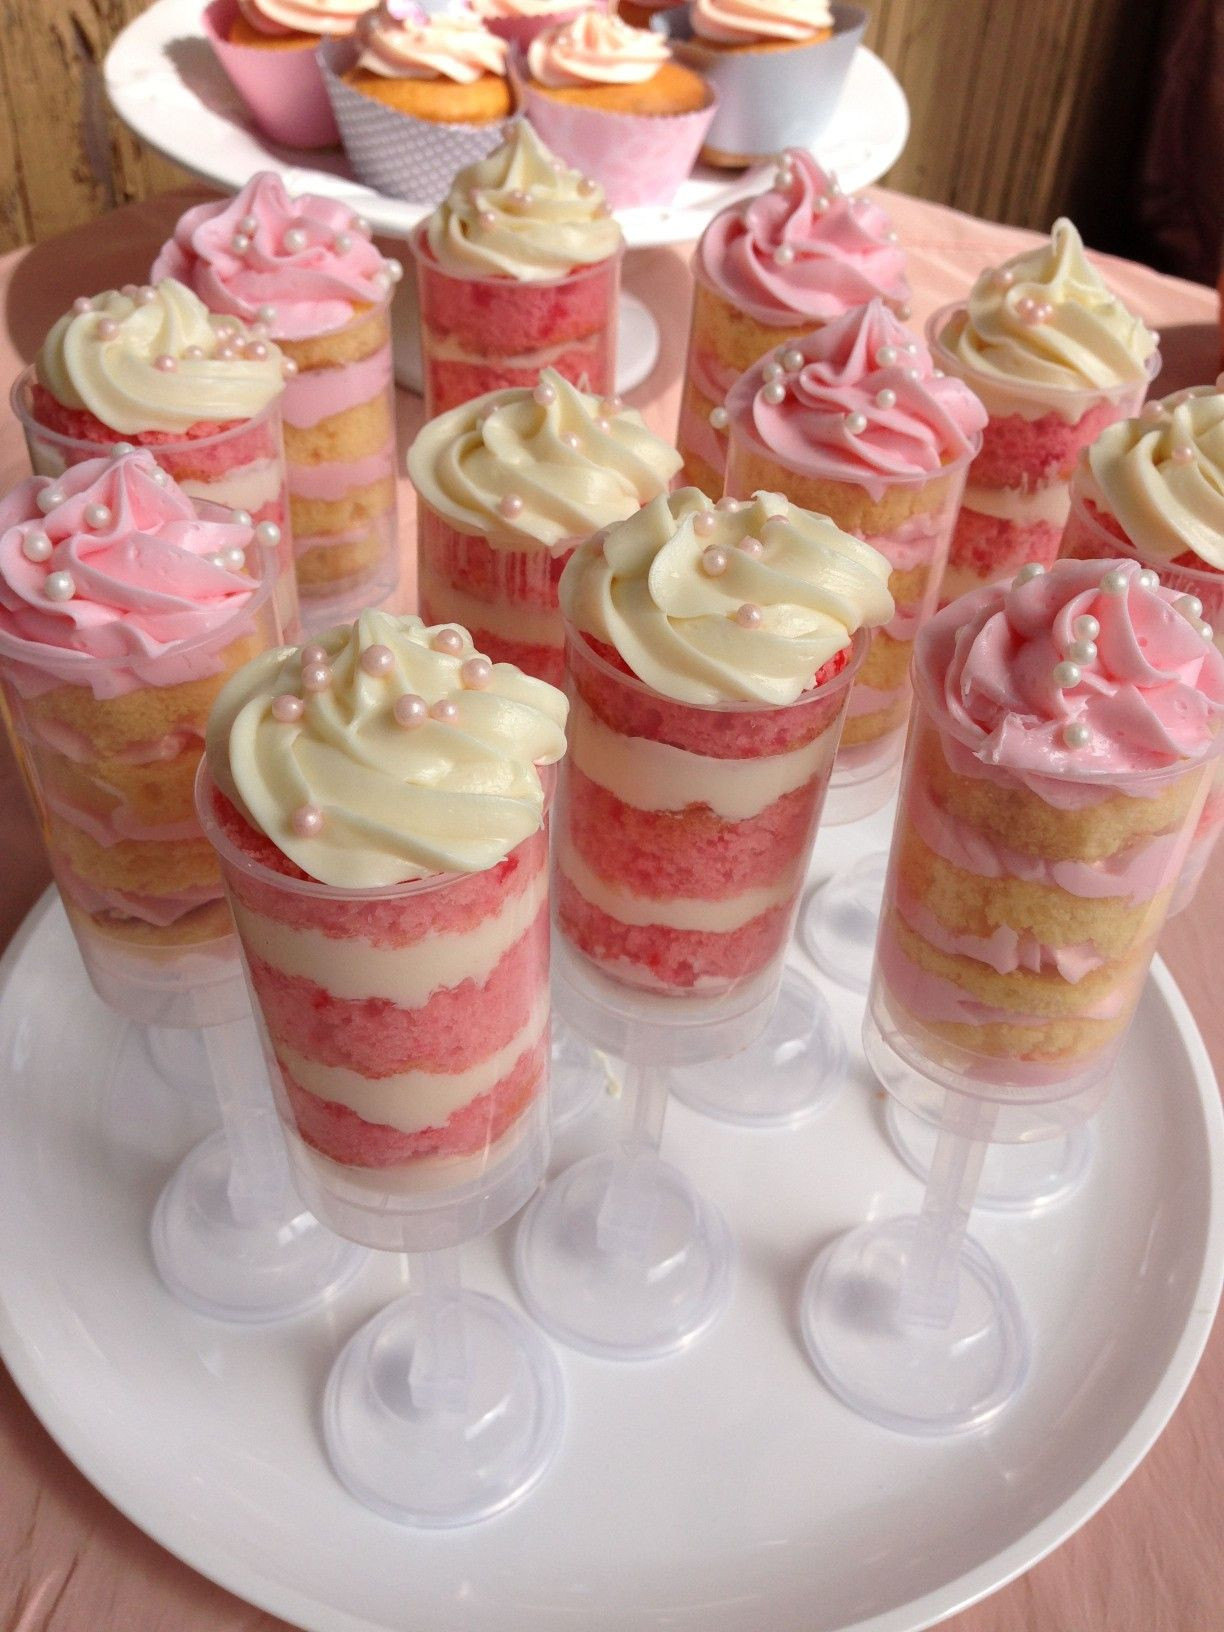 Mini Desserts for Baby Shower Best Of Pin On – ᴘ ᴀ ʟ ᴇ ᴛ ᴛ ᴇ